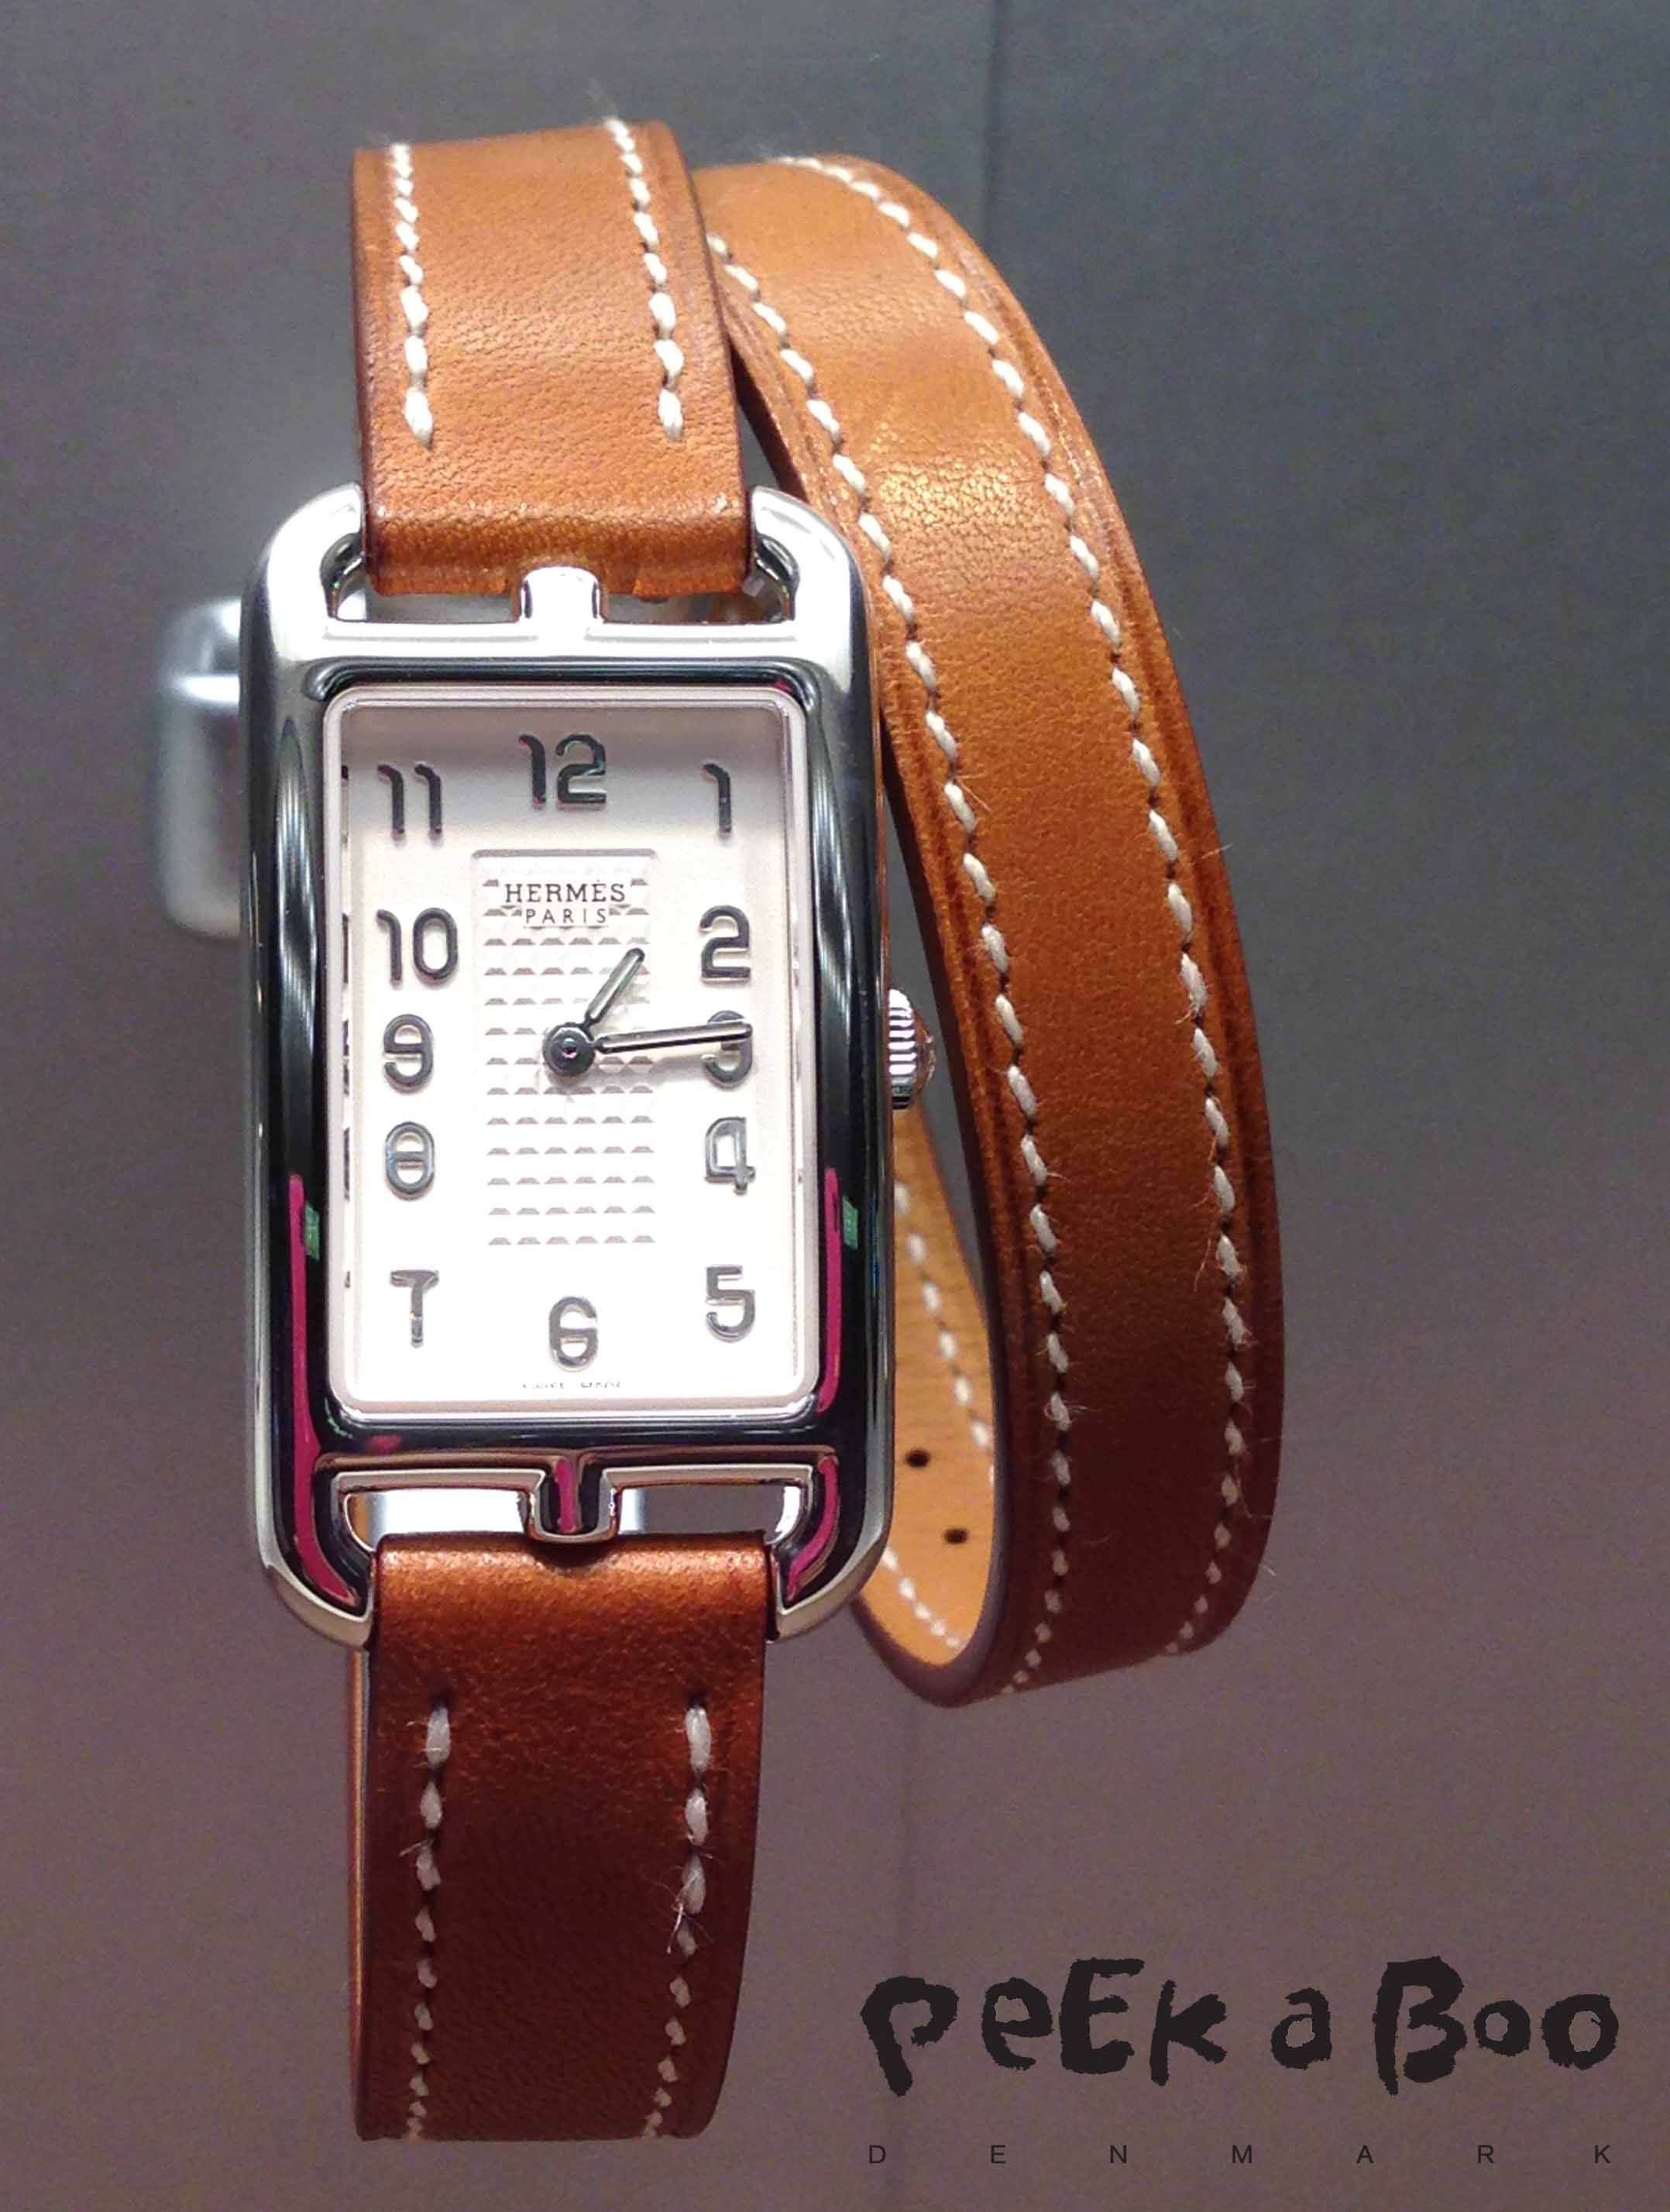 Hermes strap Watch....wauv..wauv...and a lot more wauvs....I'm in love !